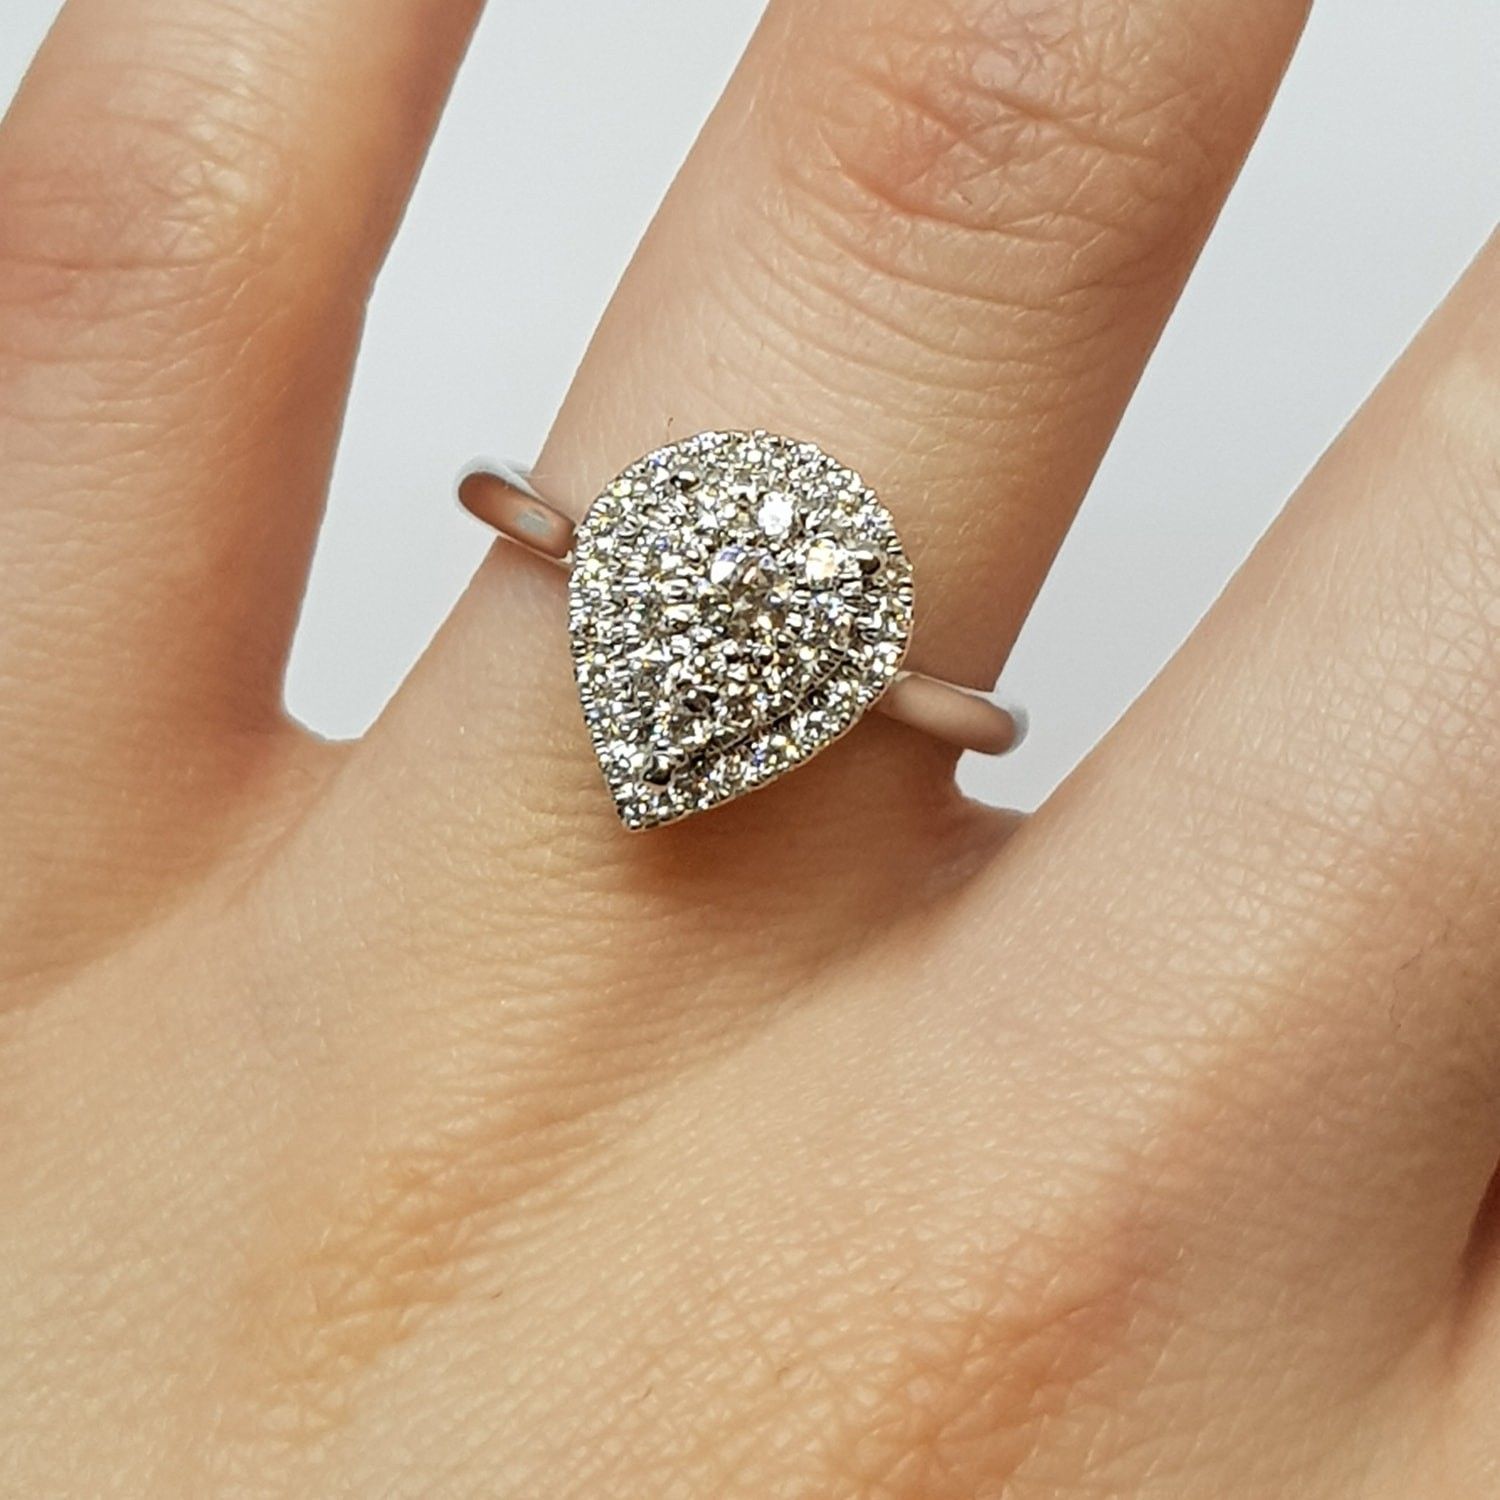 White Gold Pear Shaped Cluster Engagement Ring Within Pear Shaped Cluster Diamond Engagement Rings (View 8 of 25)